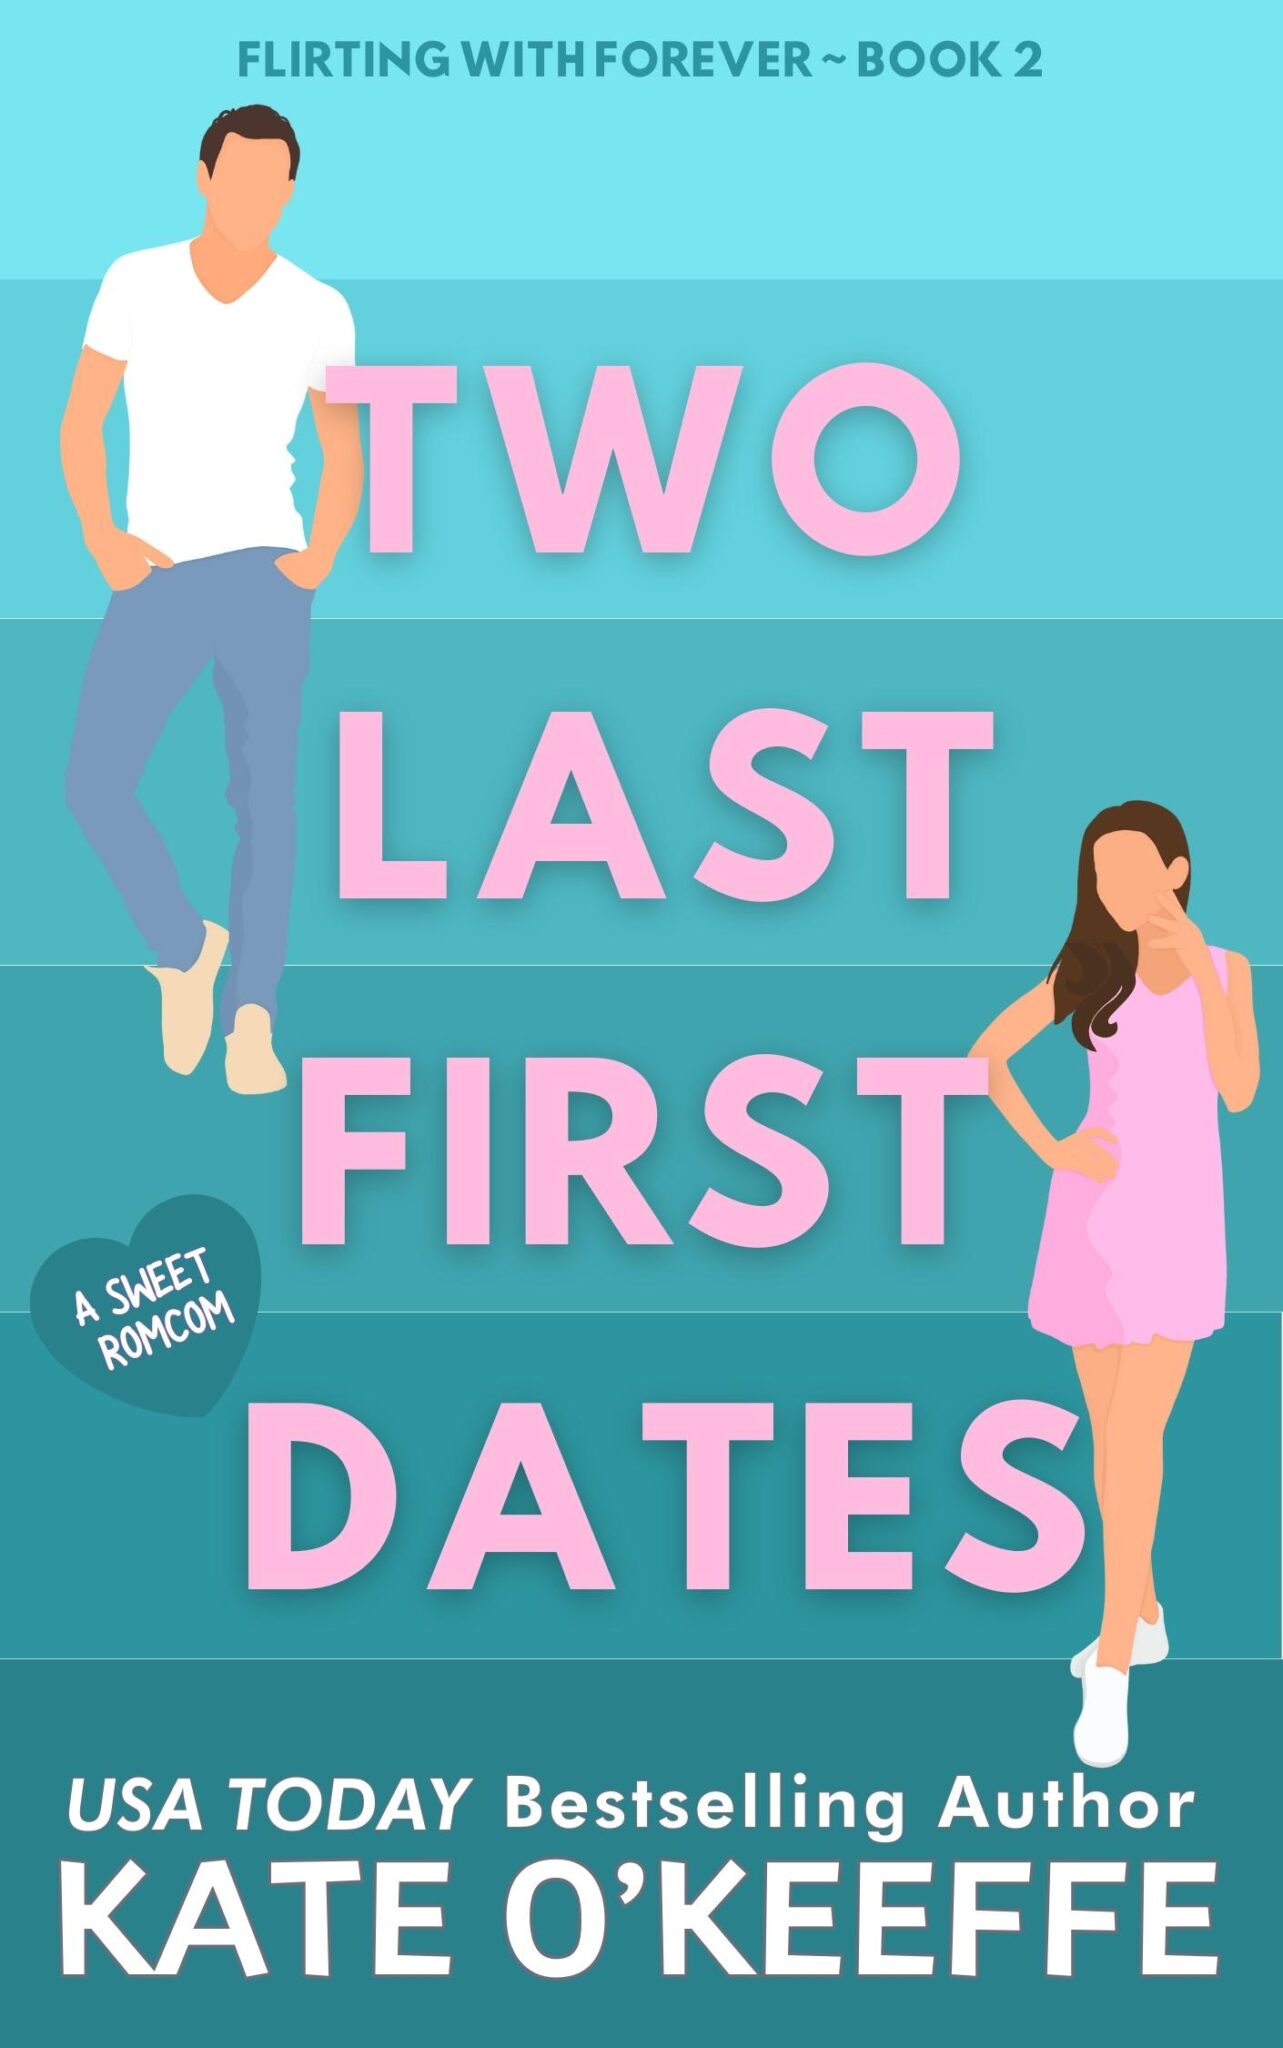 Two Last First Dates - Kate O'Keeffe